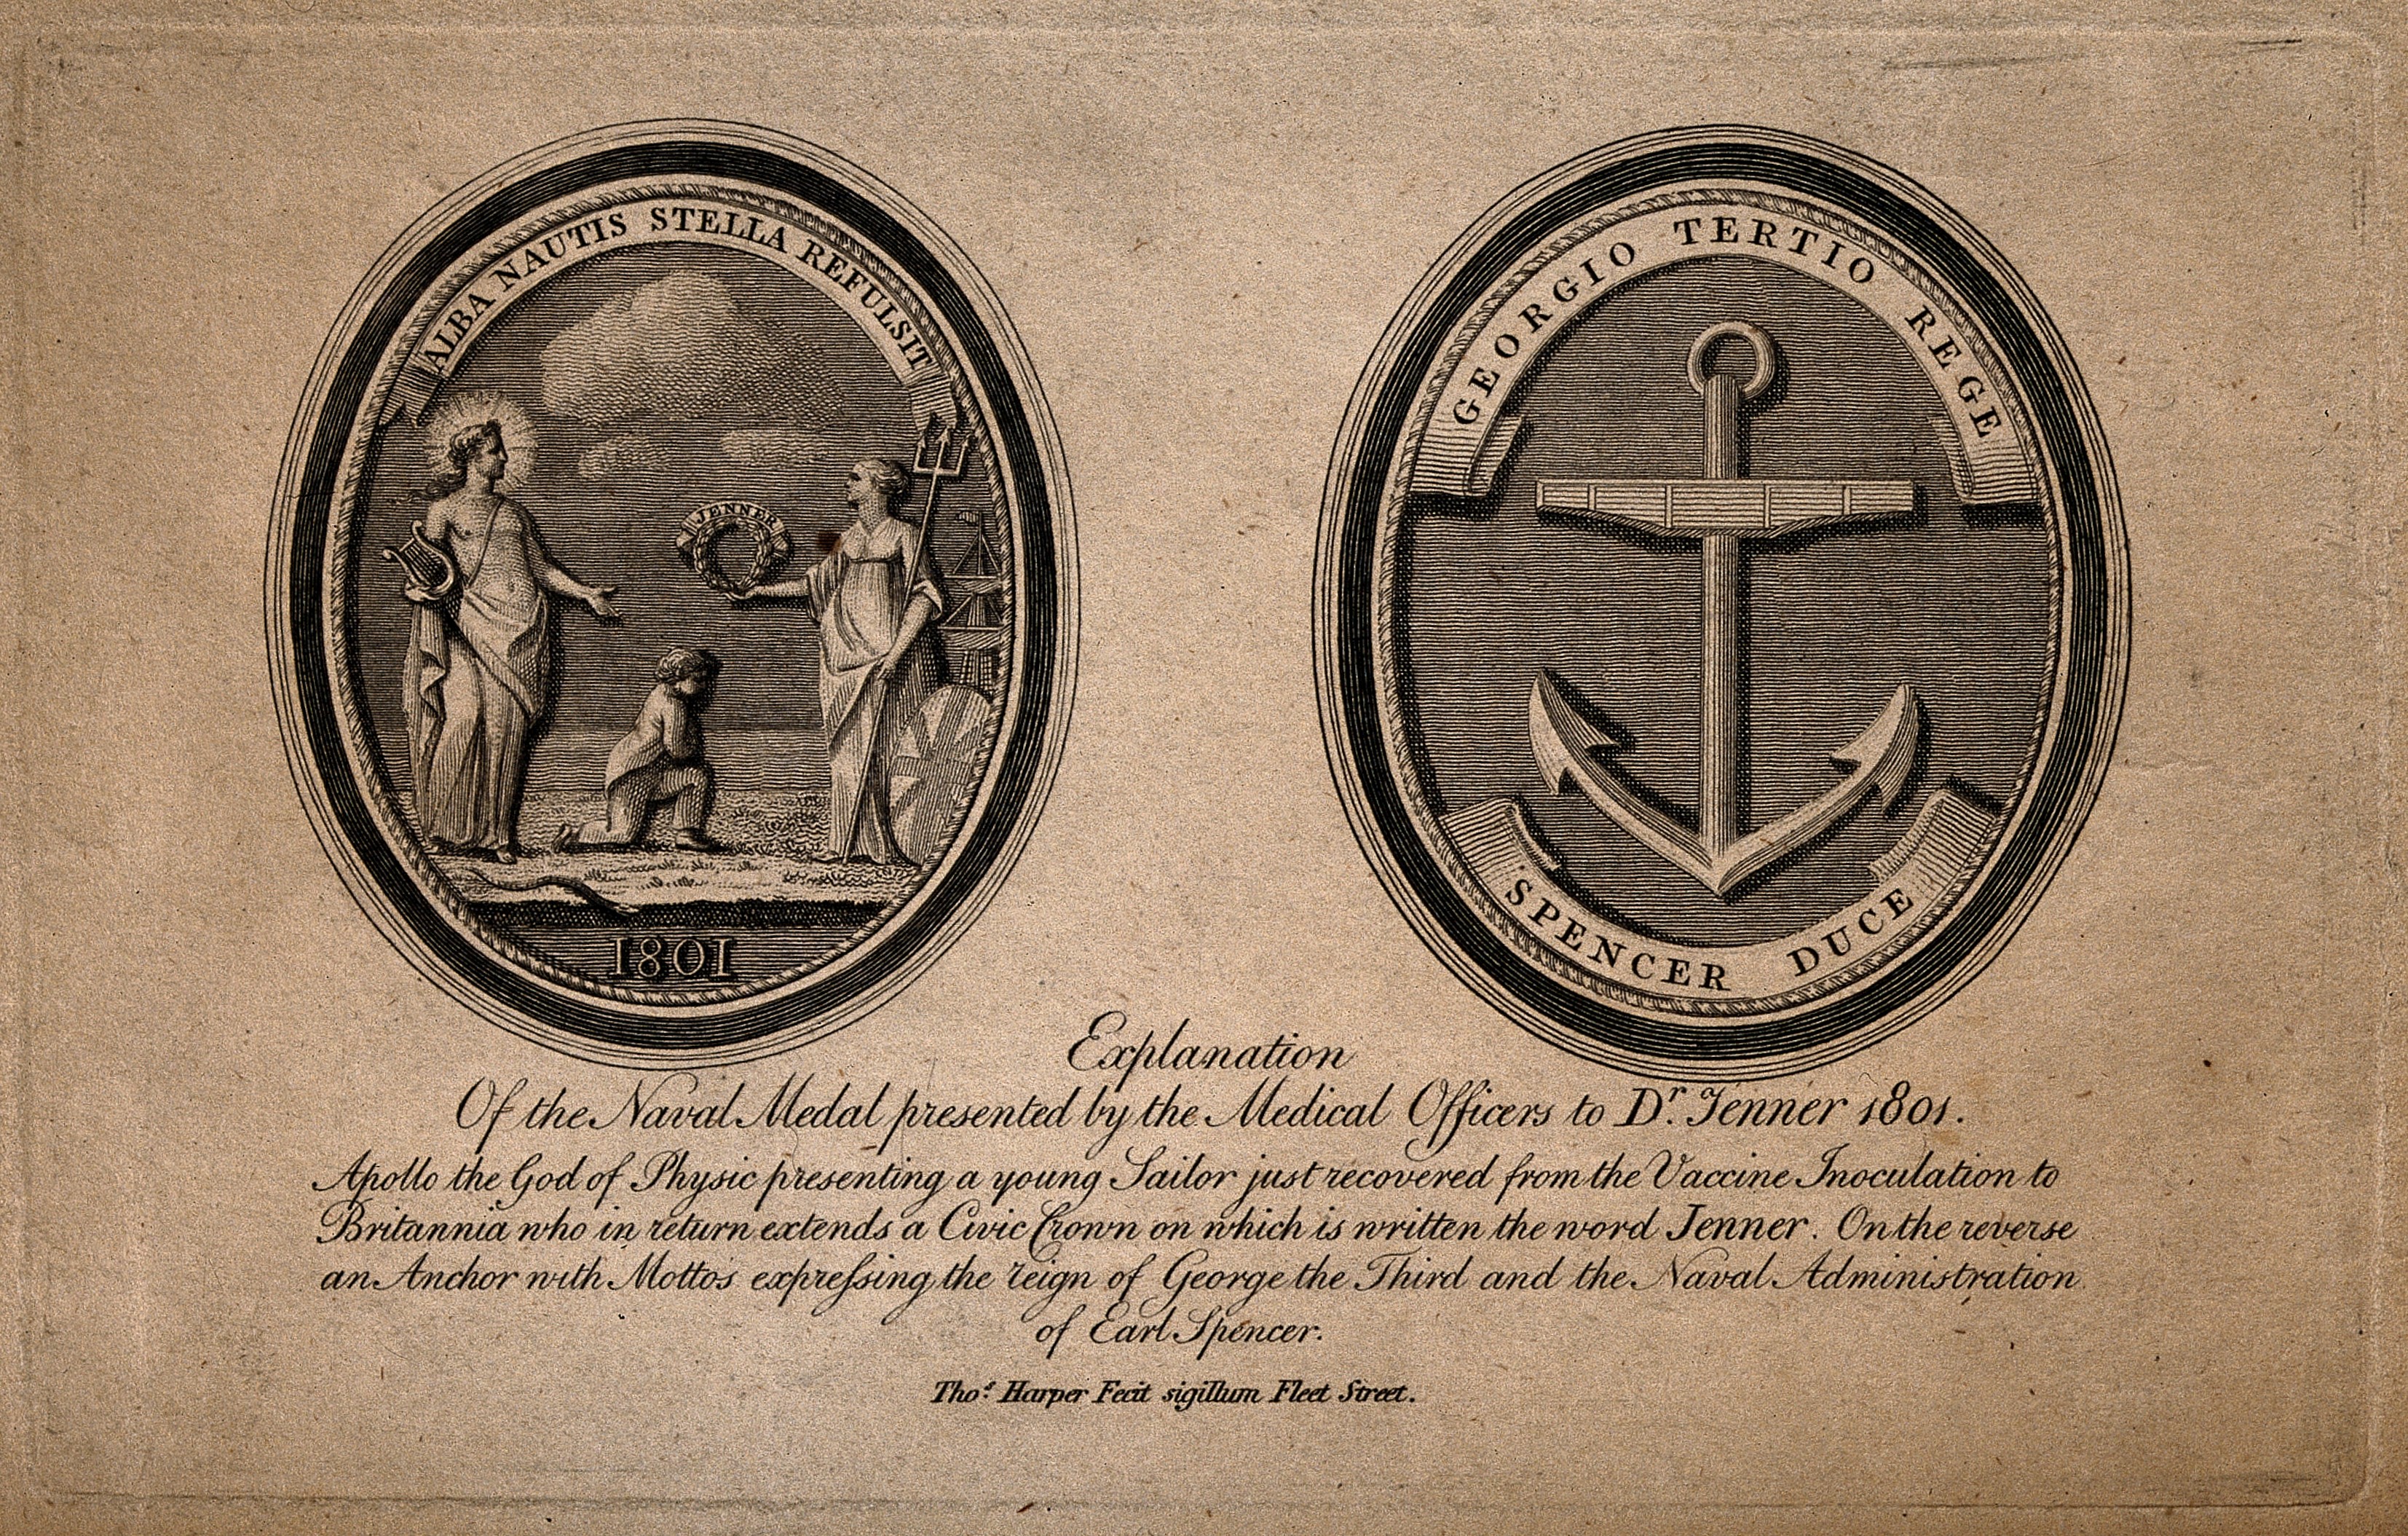 Front and back of a medal presented by British naval medical officers to Edward Jenner in 1801.